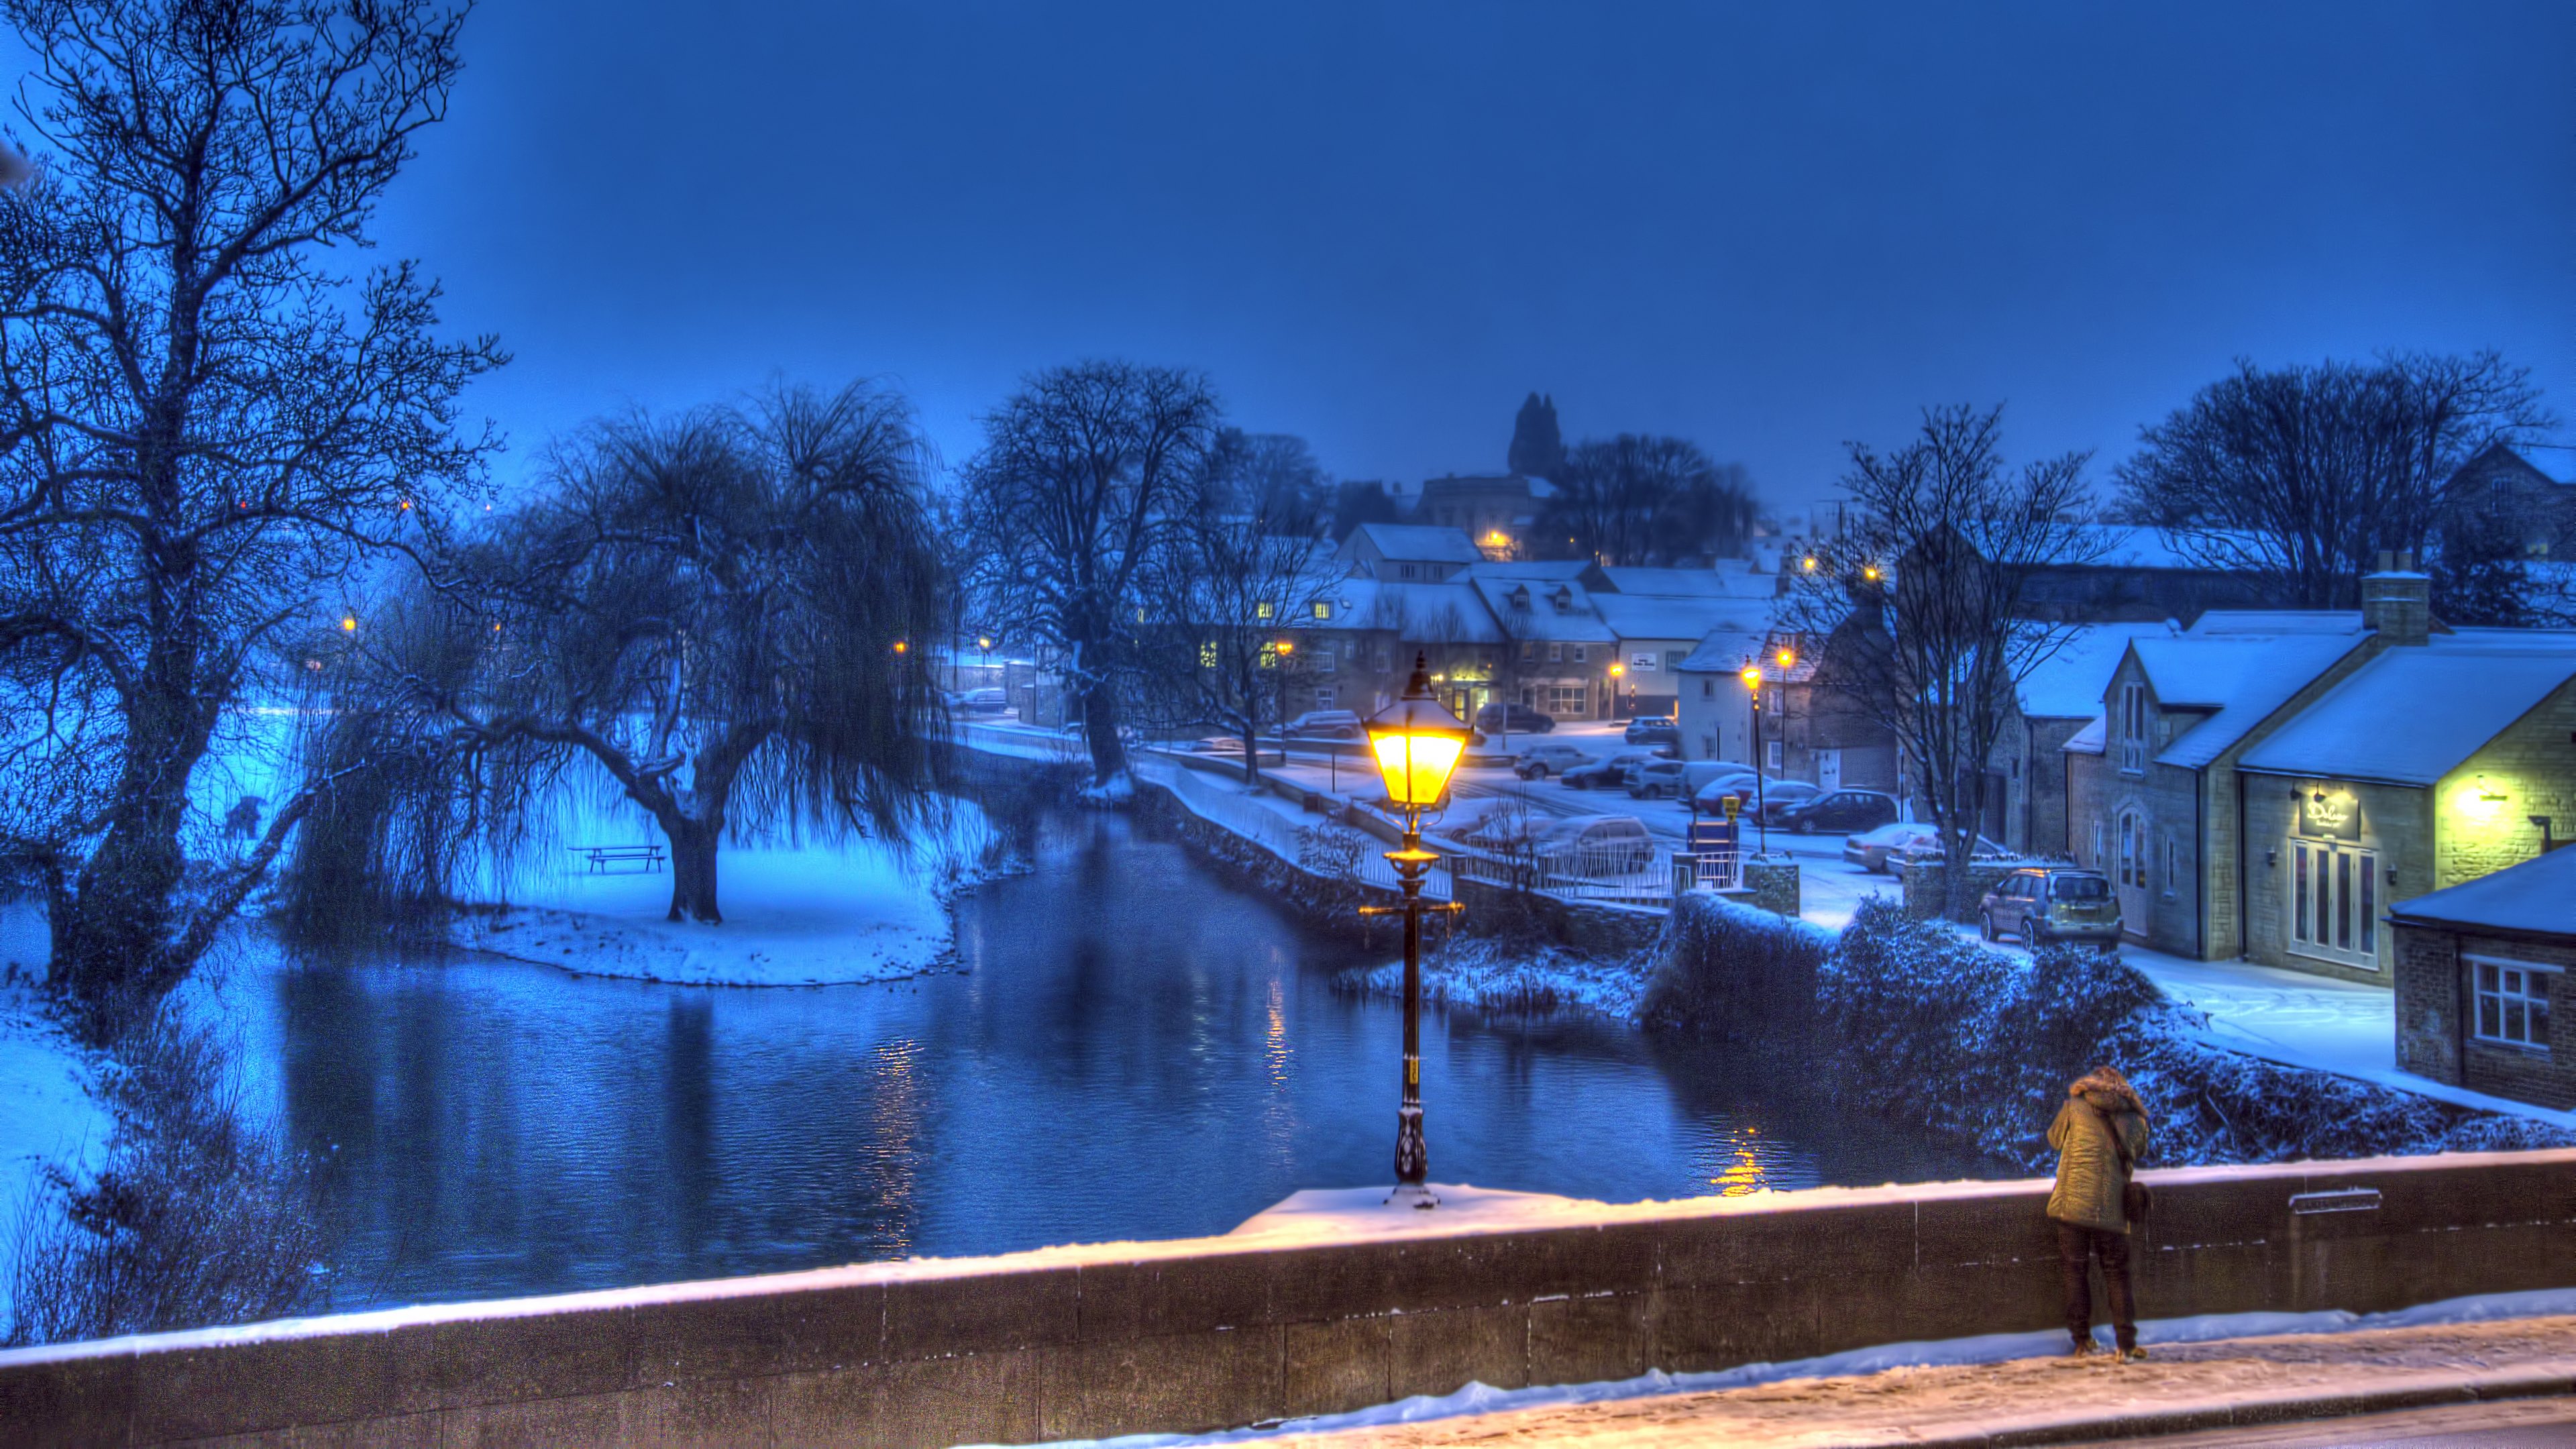 Winter Night 4k Ultra HD Wallpaper and Background Image | 3840x2160 ...